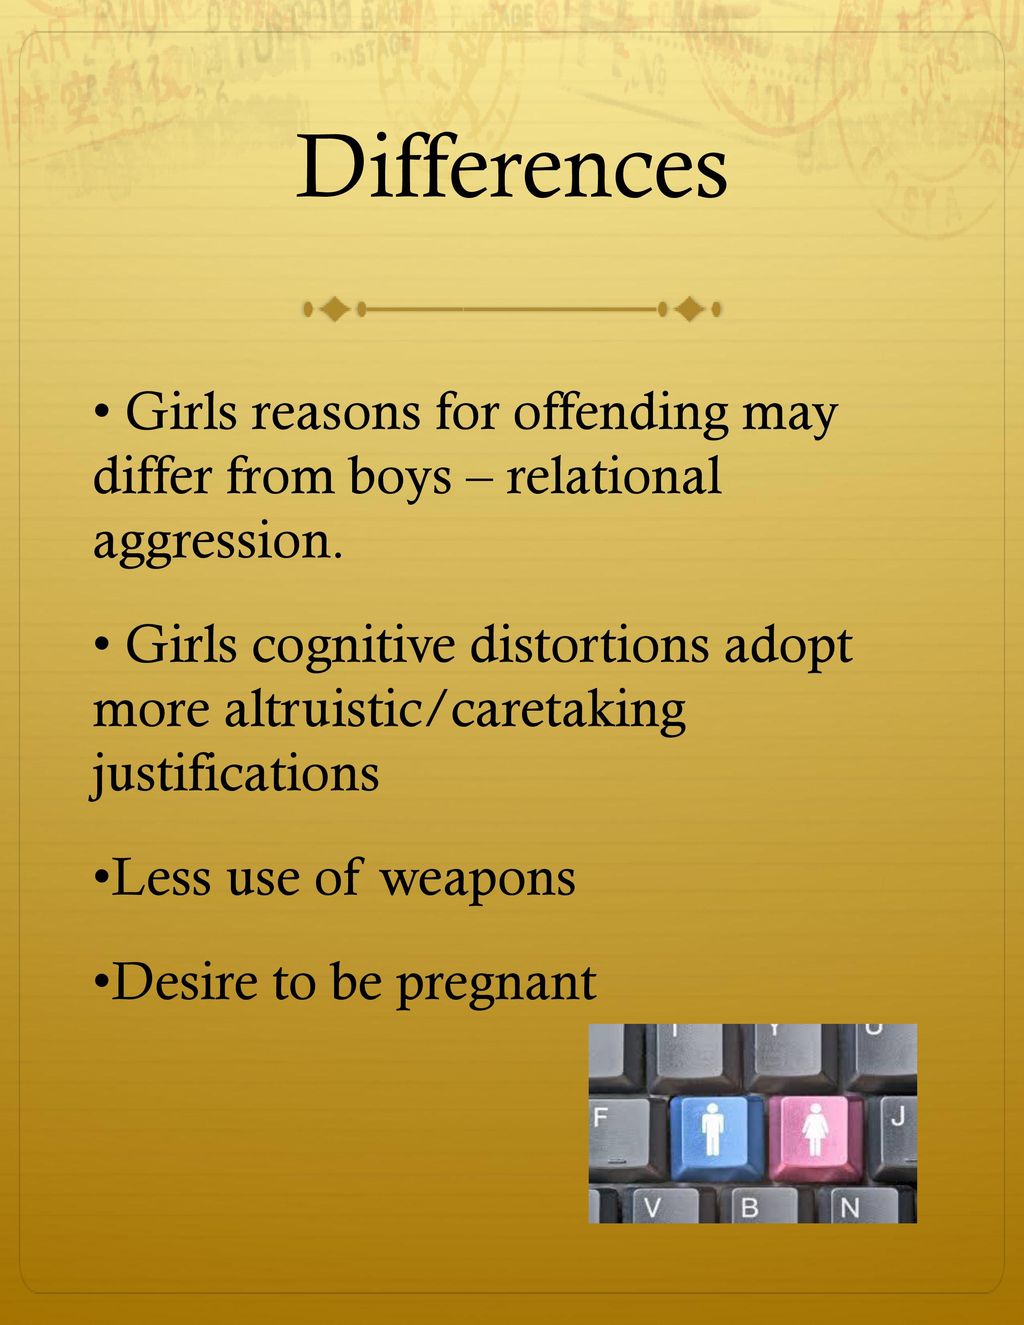 6/9/2018 Differences. Girls reasons for offending may differ from boys – relational aggression.